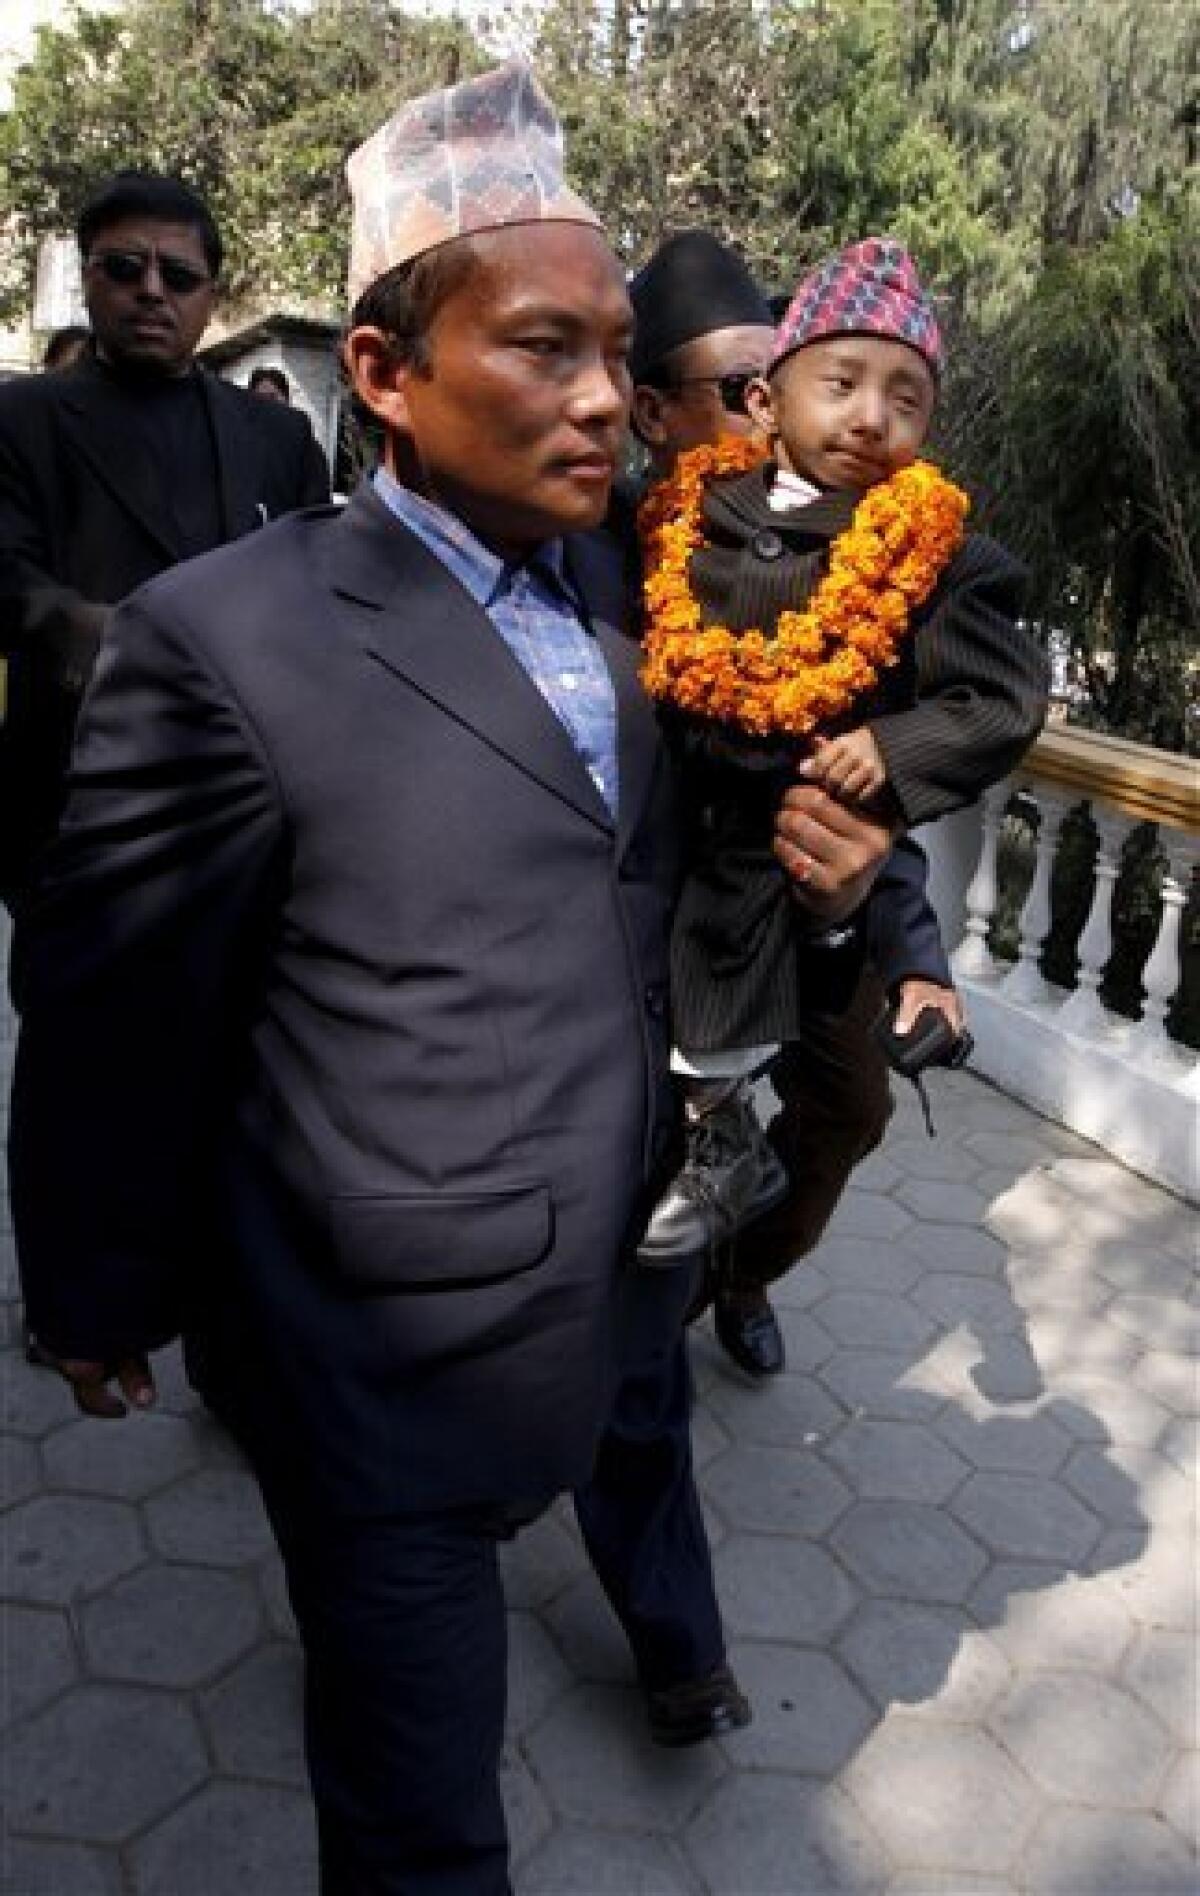 Khagendra Thapa Magar, 18, who stands at 22 inches (56 centimeters) tall, is carried by his father Rup Bahadur Thapa Magar, as he arrives for a meeting with media before leaving for Europe in Katmandu, Nepal, Sunday, Feb. 21, 2010. Magar's family initially filed a claim for the title of the world's shortest man when he was just 14 years old but it was rejected since he was not an adult and there was a chance he might grow, said Min Bahadur Ranamagar, of the Khagendra Thapa Magar Foundation. Magar turned 18 in October 2009. (AP Photo/Binod Joshi)